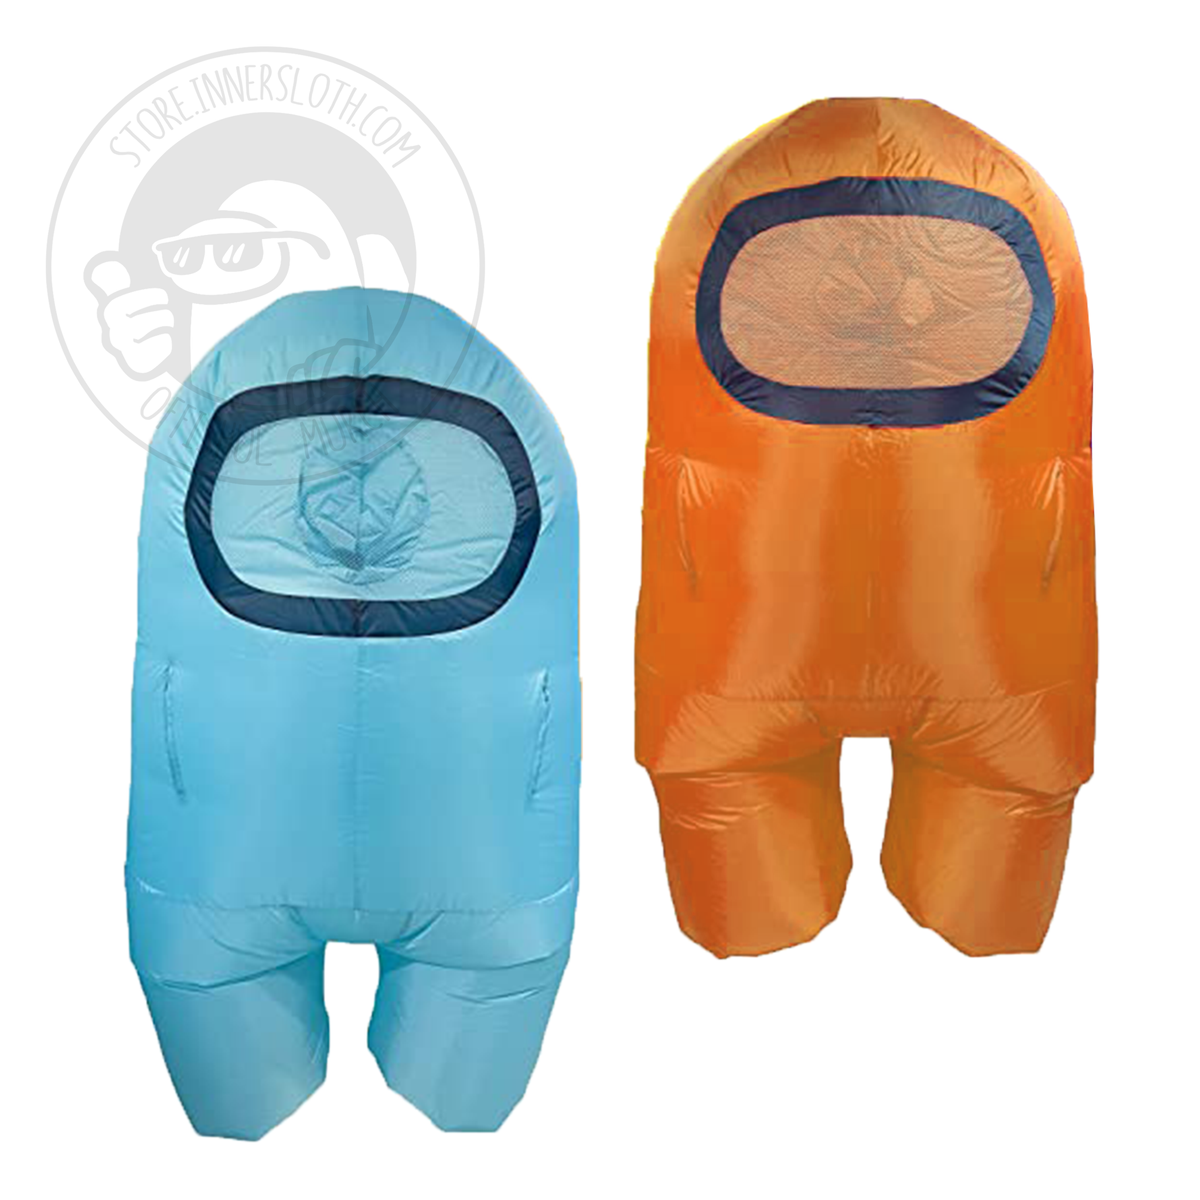 Front view group shot of the Cyan &amp; Orange children&#39;s inflatable Crewmate costumes. The Crewmate visors are made of netted material plastic to not obscure children&#39;s vision.